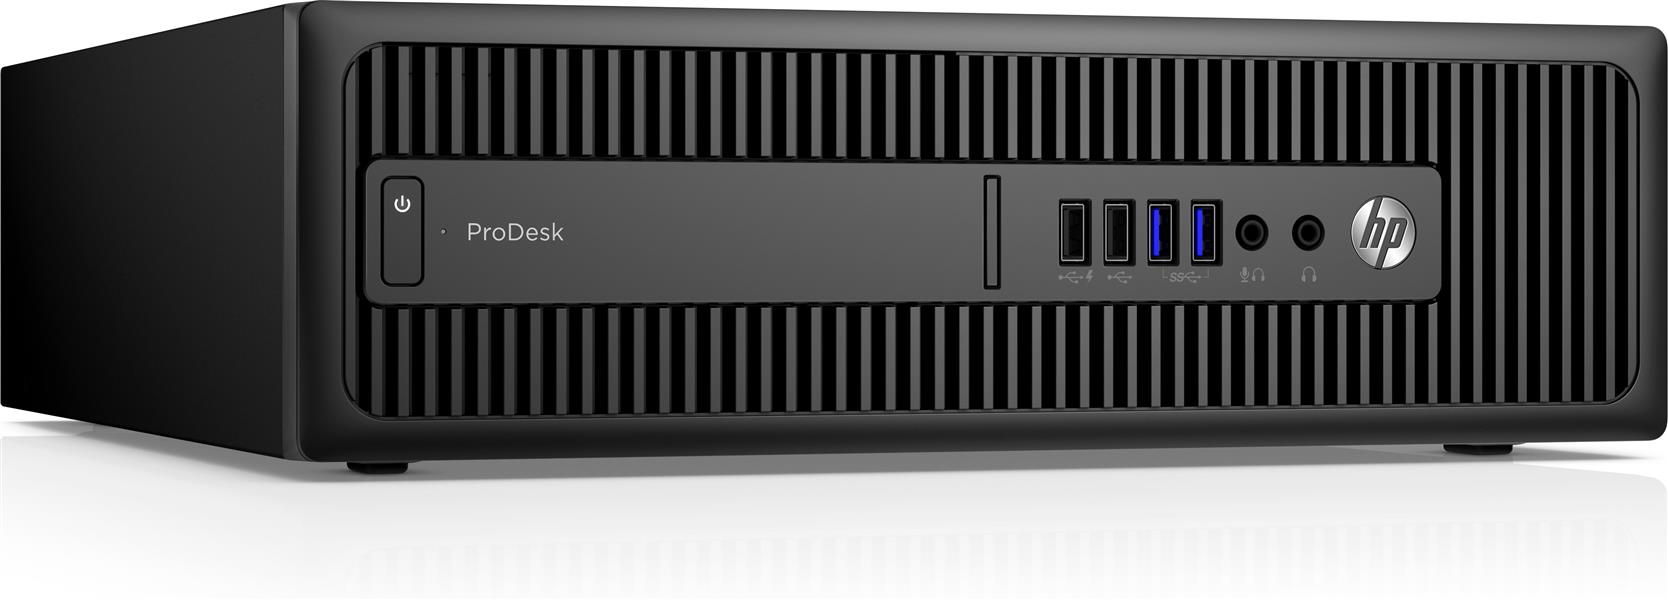 HP ProDesk 600 G2 small form factor pc